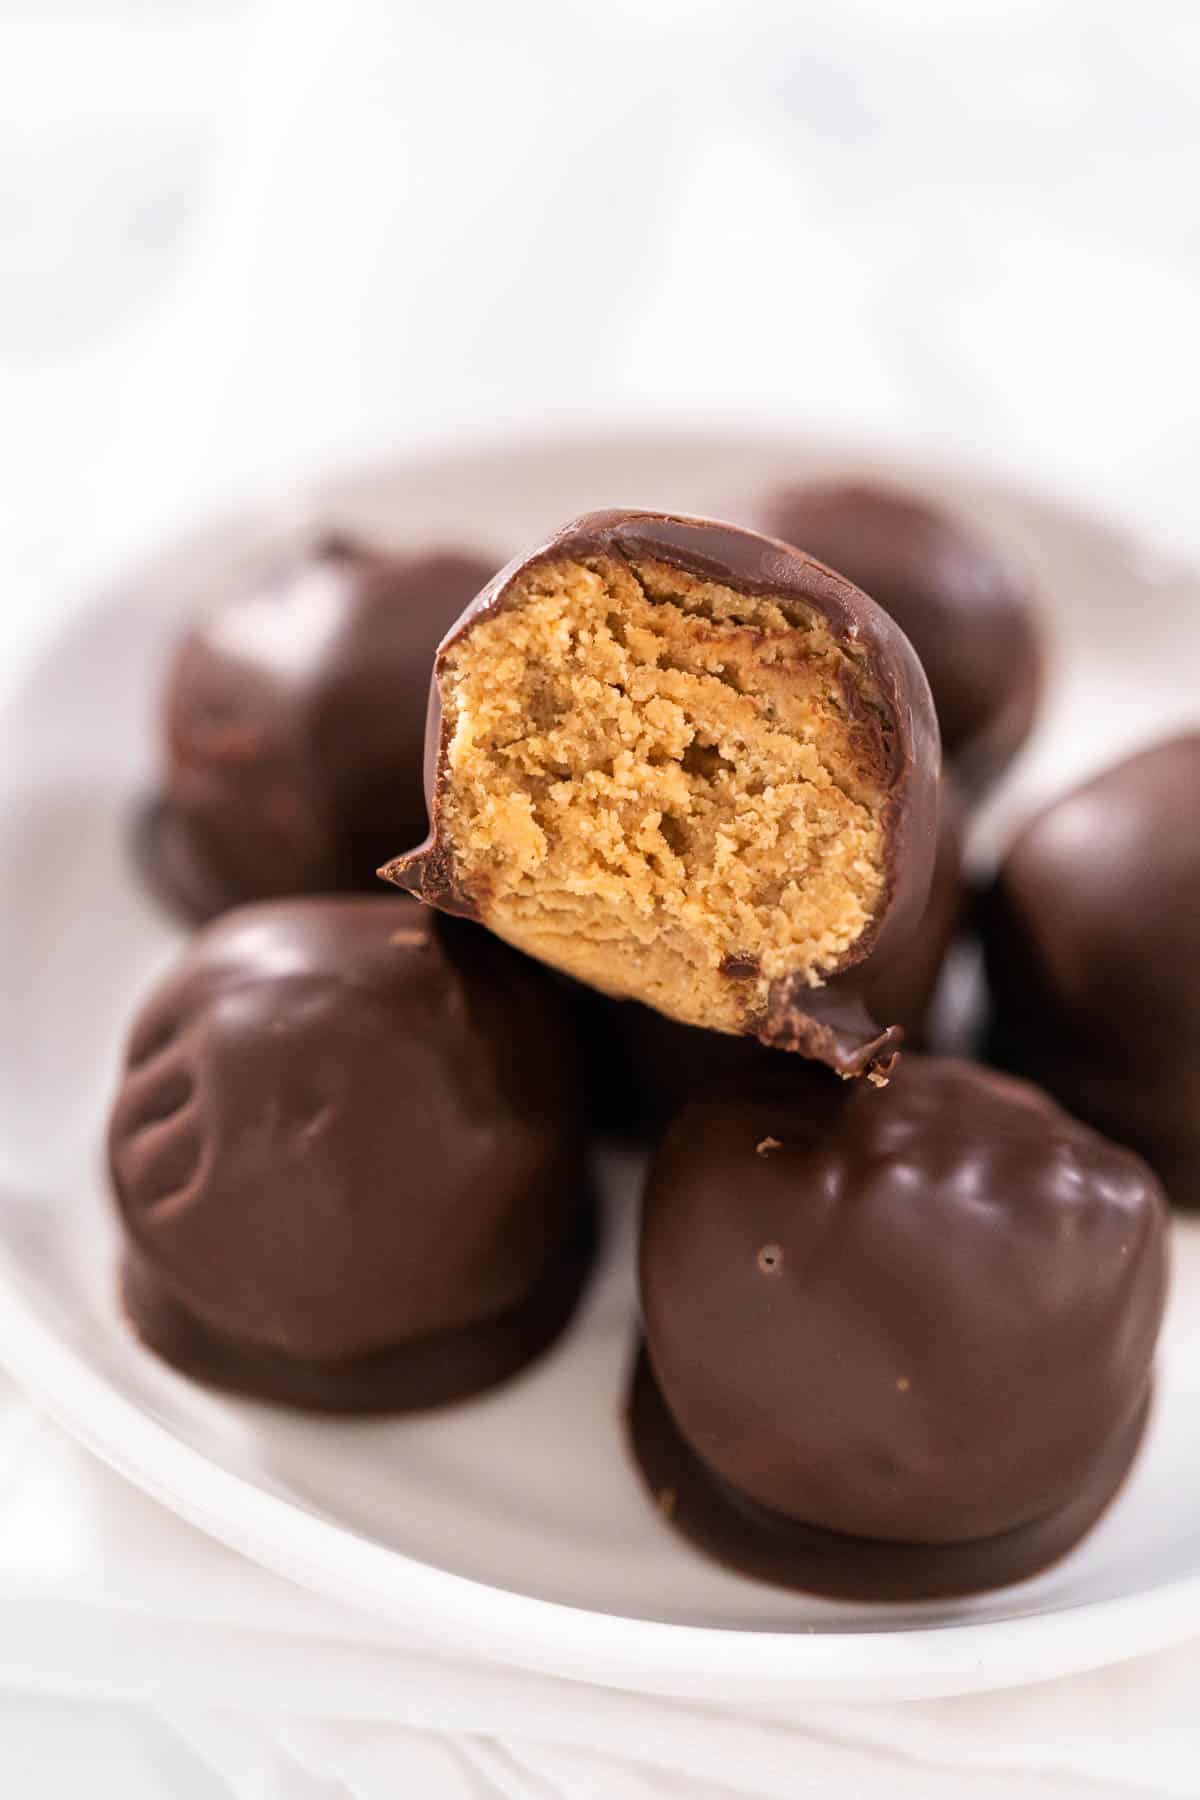 Chocolate coated peanut butter balls.